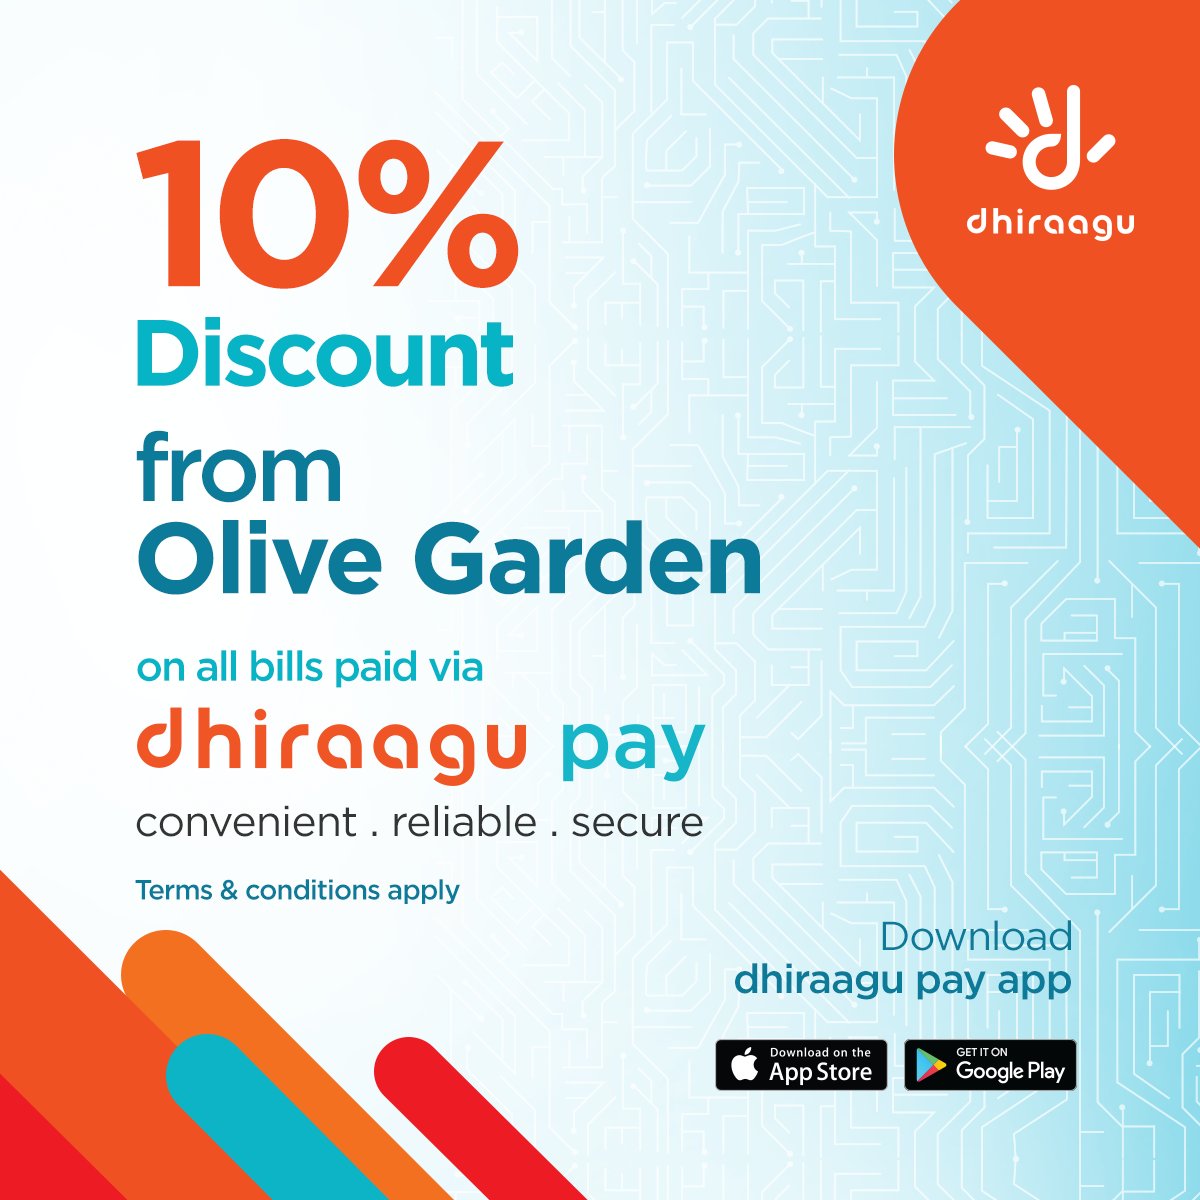 Dhiraagu On Twitter Pay Using Dhiraagupay And Get 10 Discount